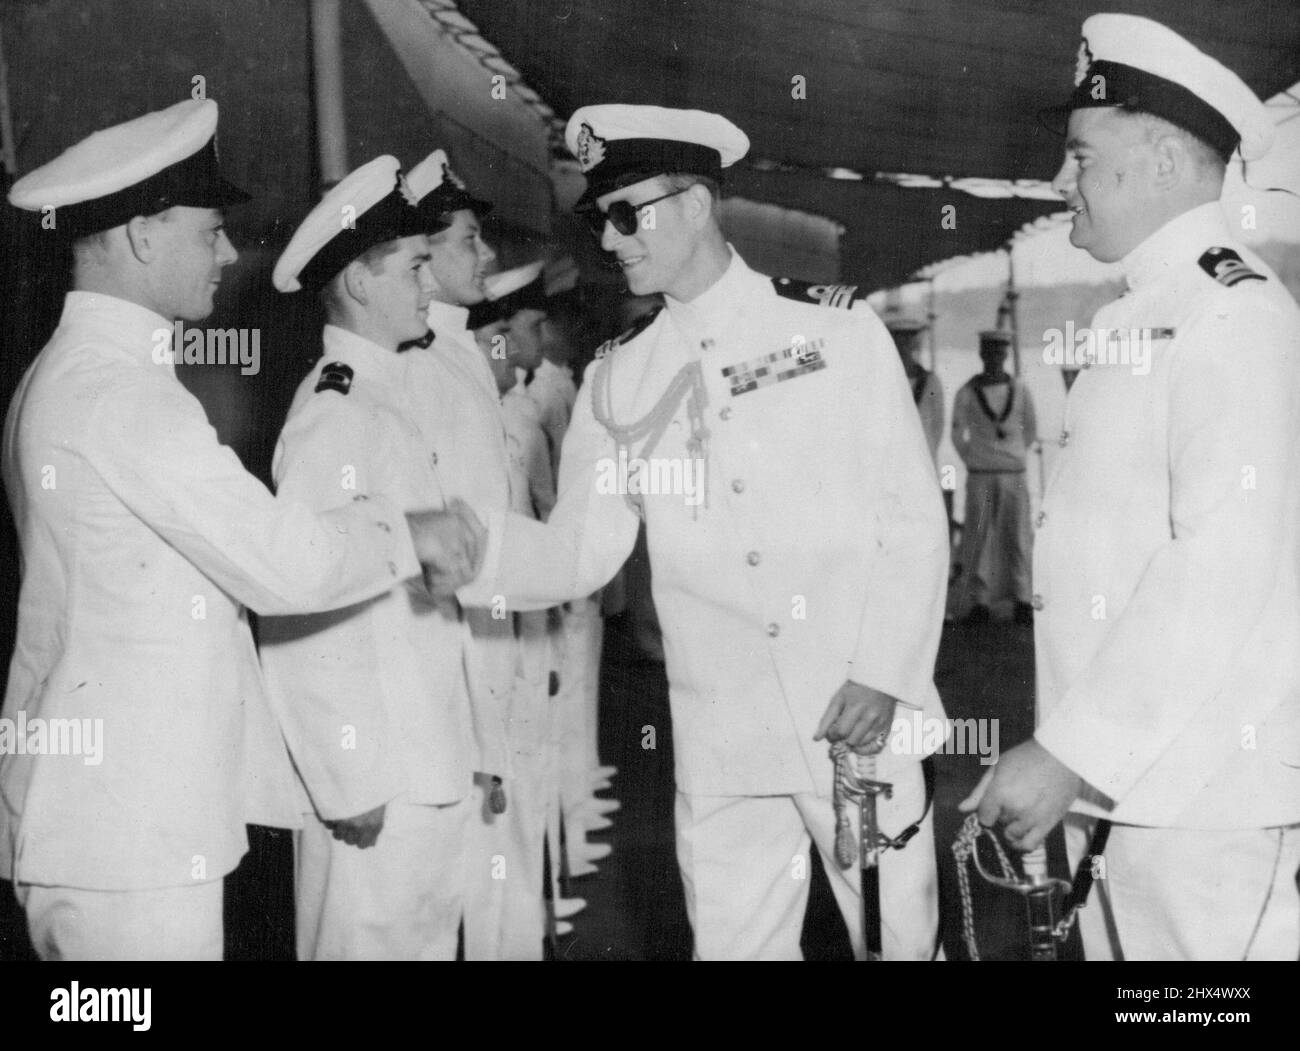 The Duke of Edinburgh Takes Over Lieutenant Commander The Duke of Edinburgh, accompanied by Lieutenant Commander A. L. Harper (right), from whom he is taking over command of HMS Magpie, shakes hands with chief petty officer V. H. Clark, D.S.M., Coxswain, of Purbrook, Hampshire, Sept. 2, at Malta. September 11, 1950. (Photo by Associated Press Photo). Stock Photo